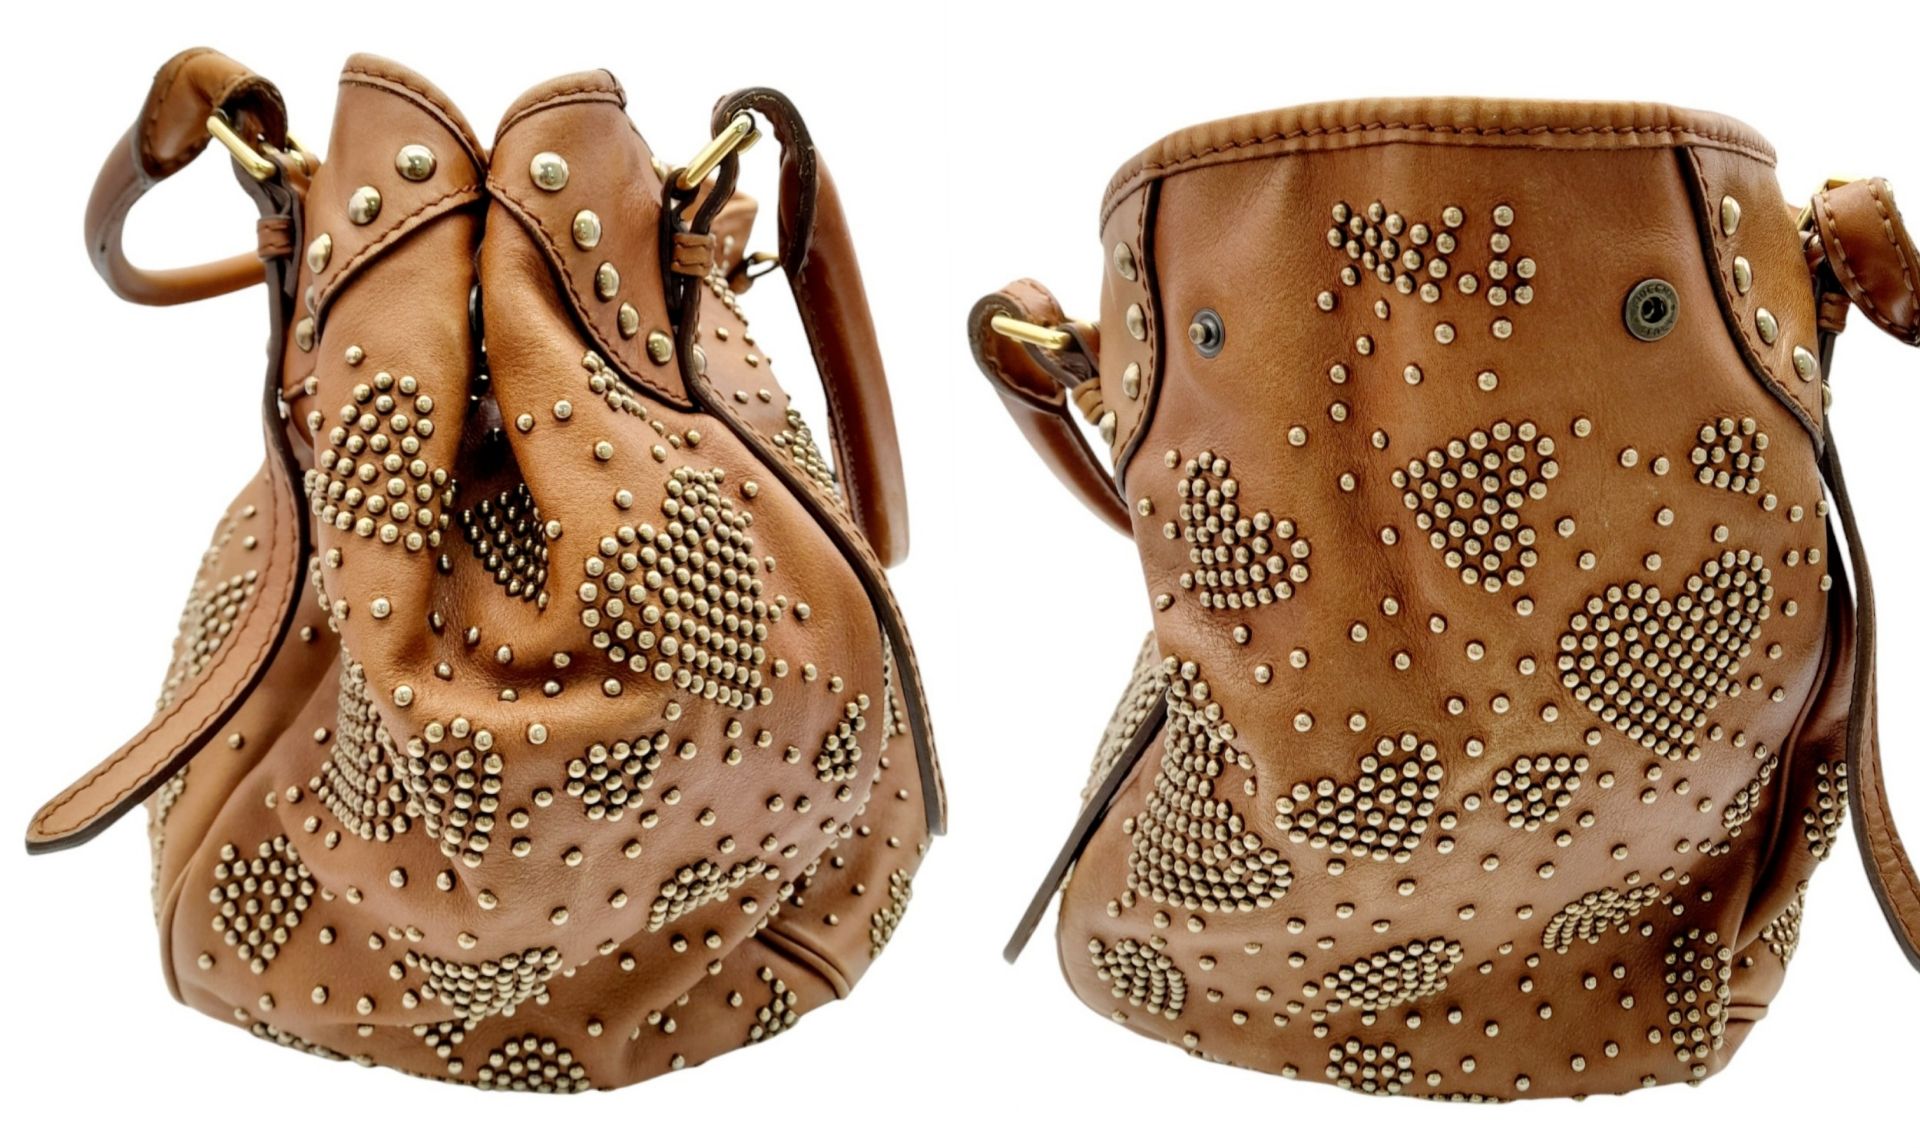 A Burberry Tan Studded Heart Hobo Bag. Leather exterior with stud embellishments, golden-toned - Image 4 of 8